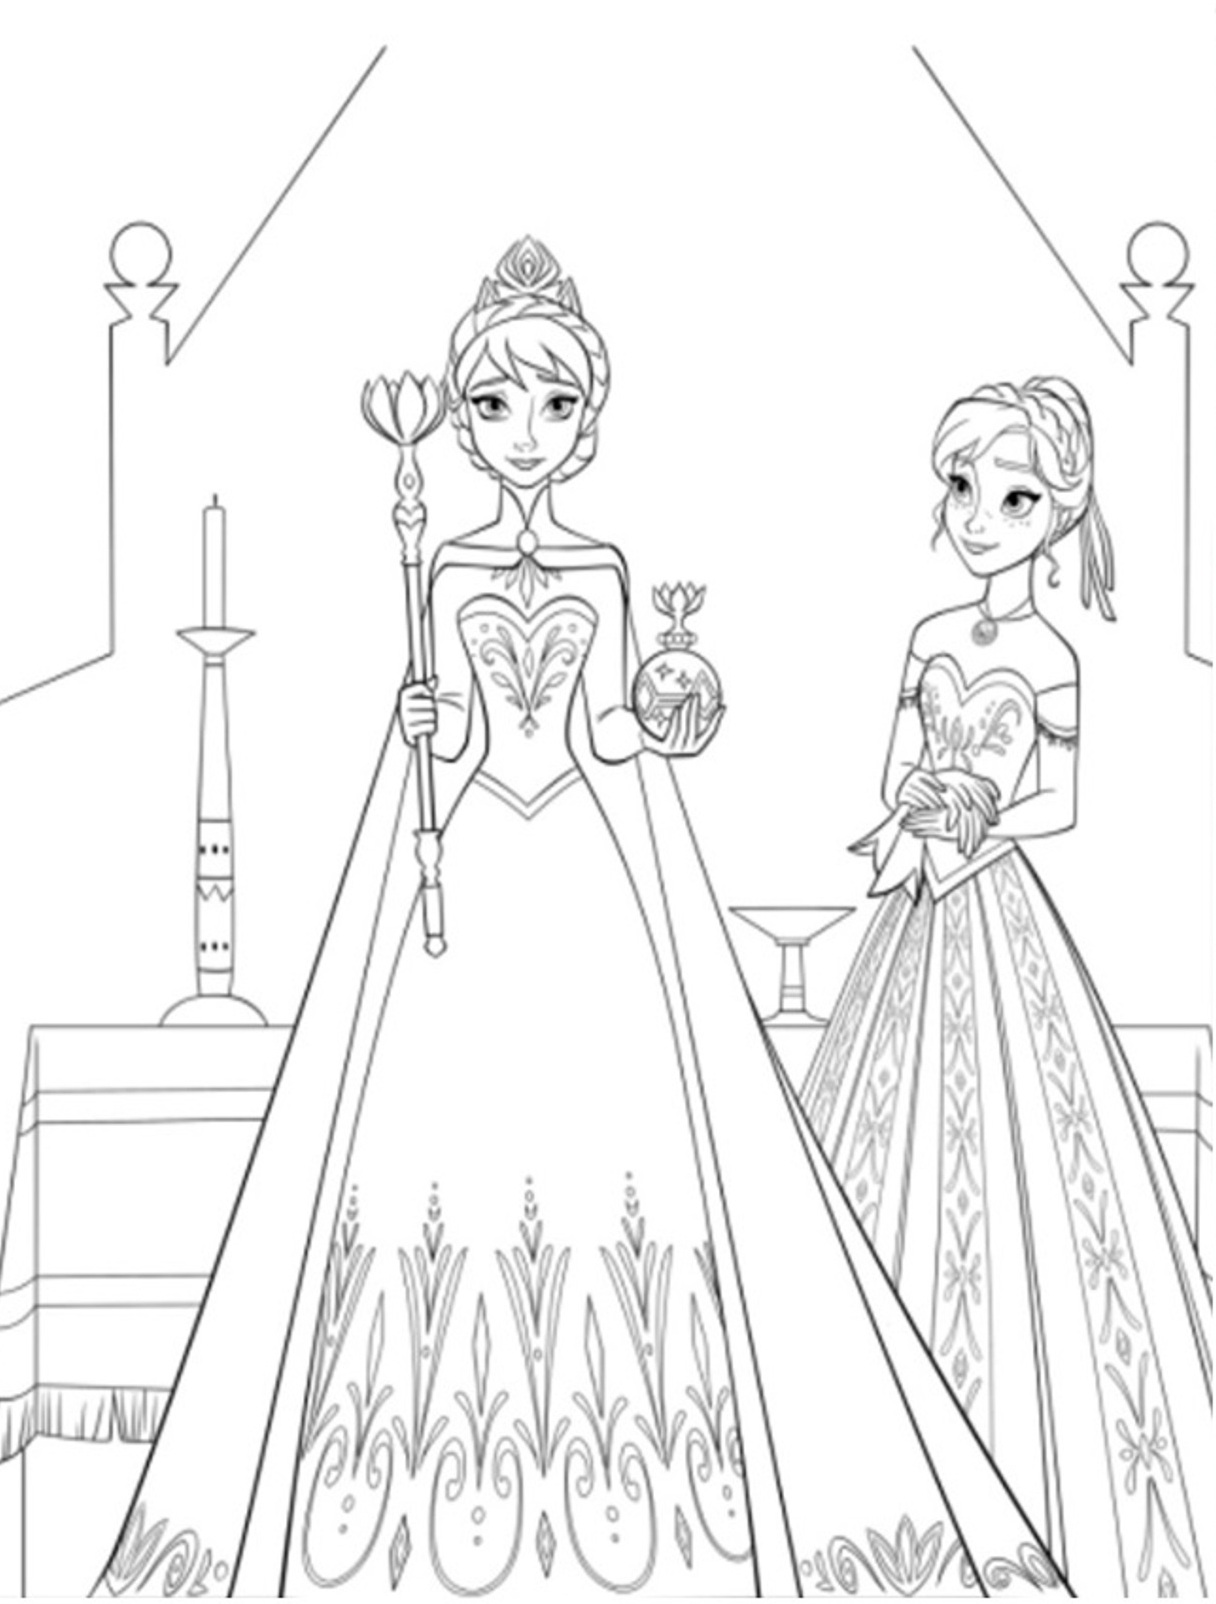 Frozen 2 Coloring Pages at GetColorings.com | Free printable colorings